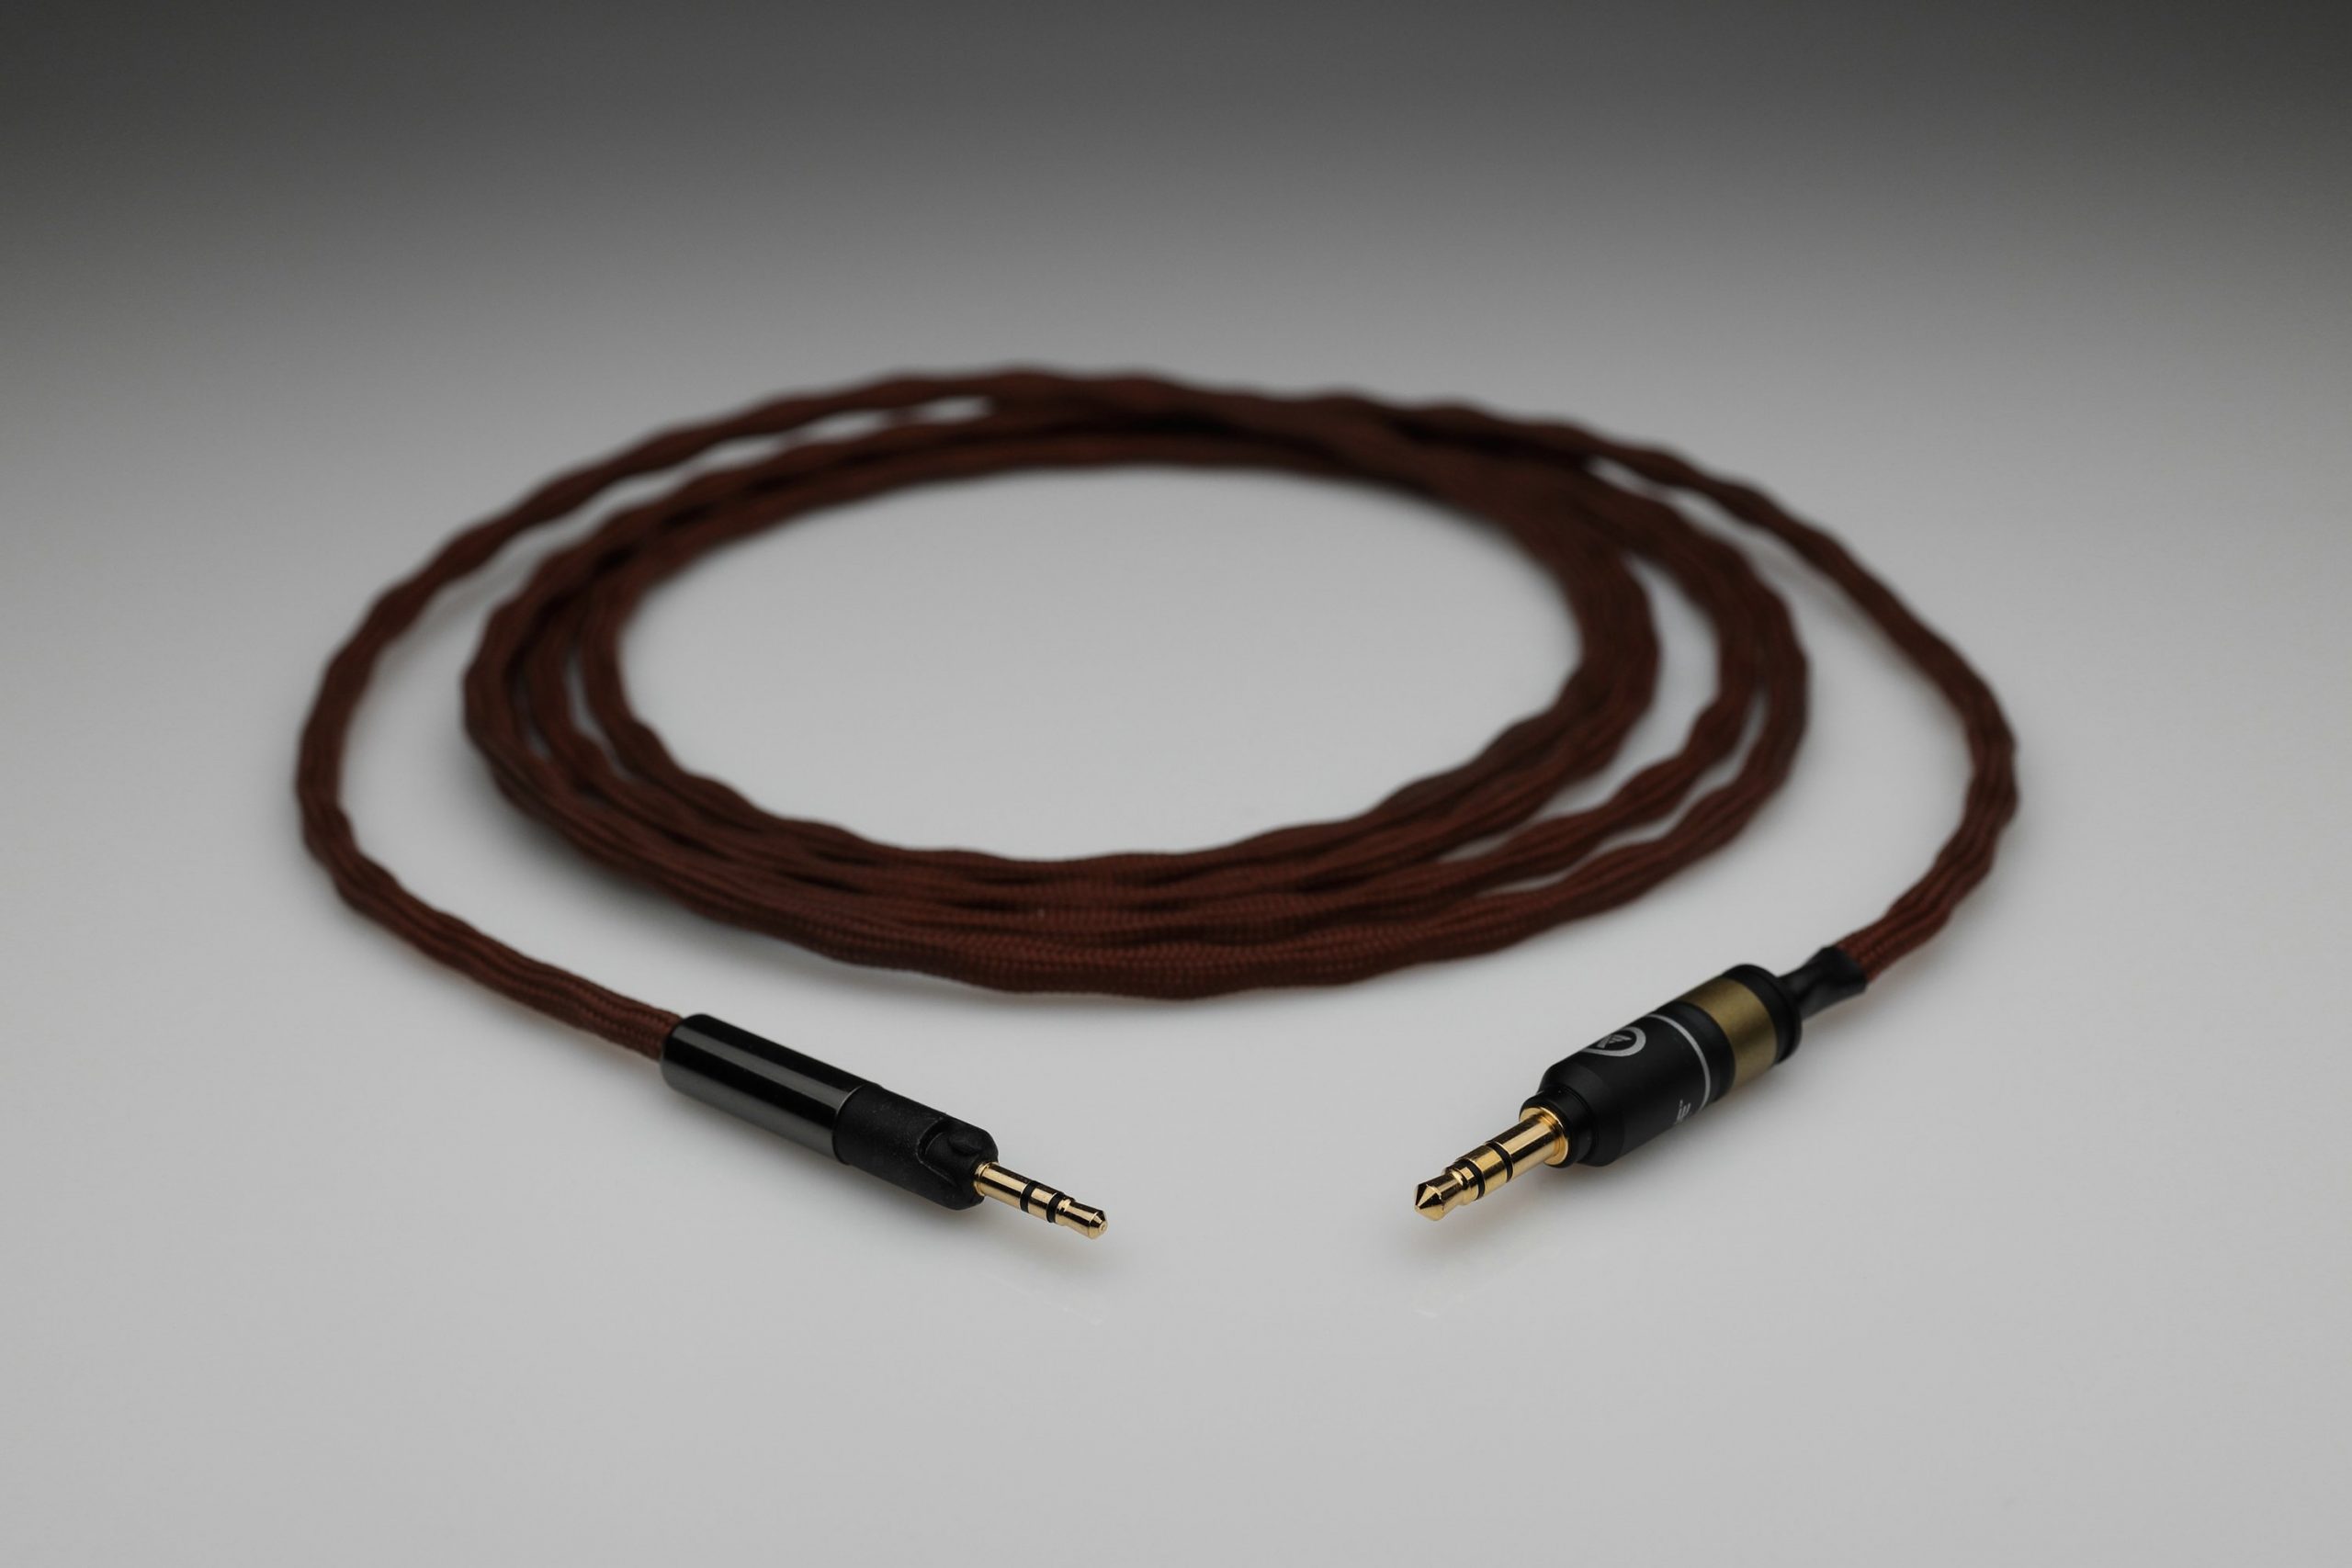 Ultra-low capacitance cable for Sennheiser HD600 / HD650 / HD580 3.5mm  6.3mm TRS